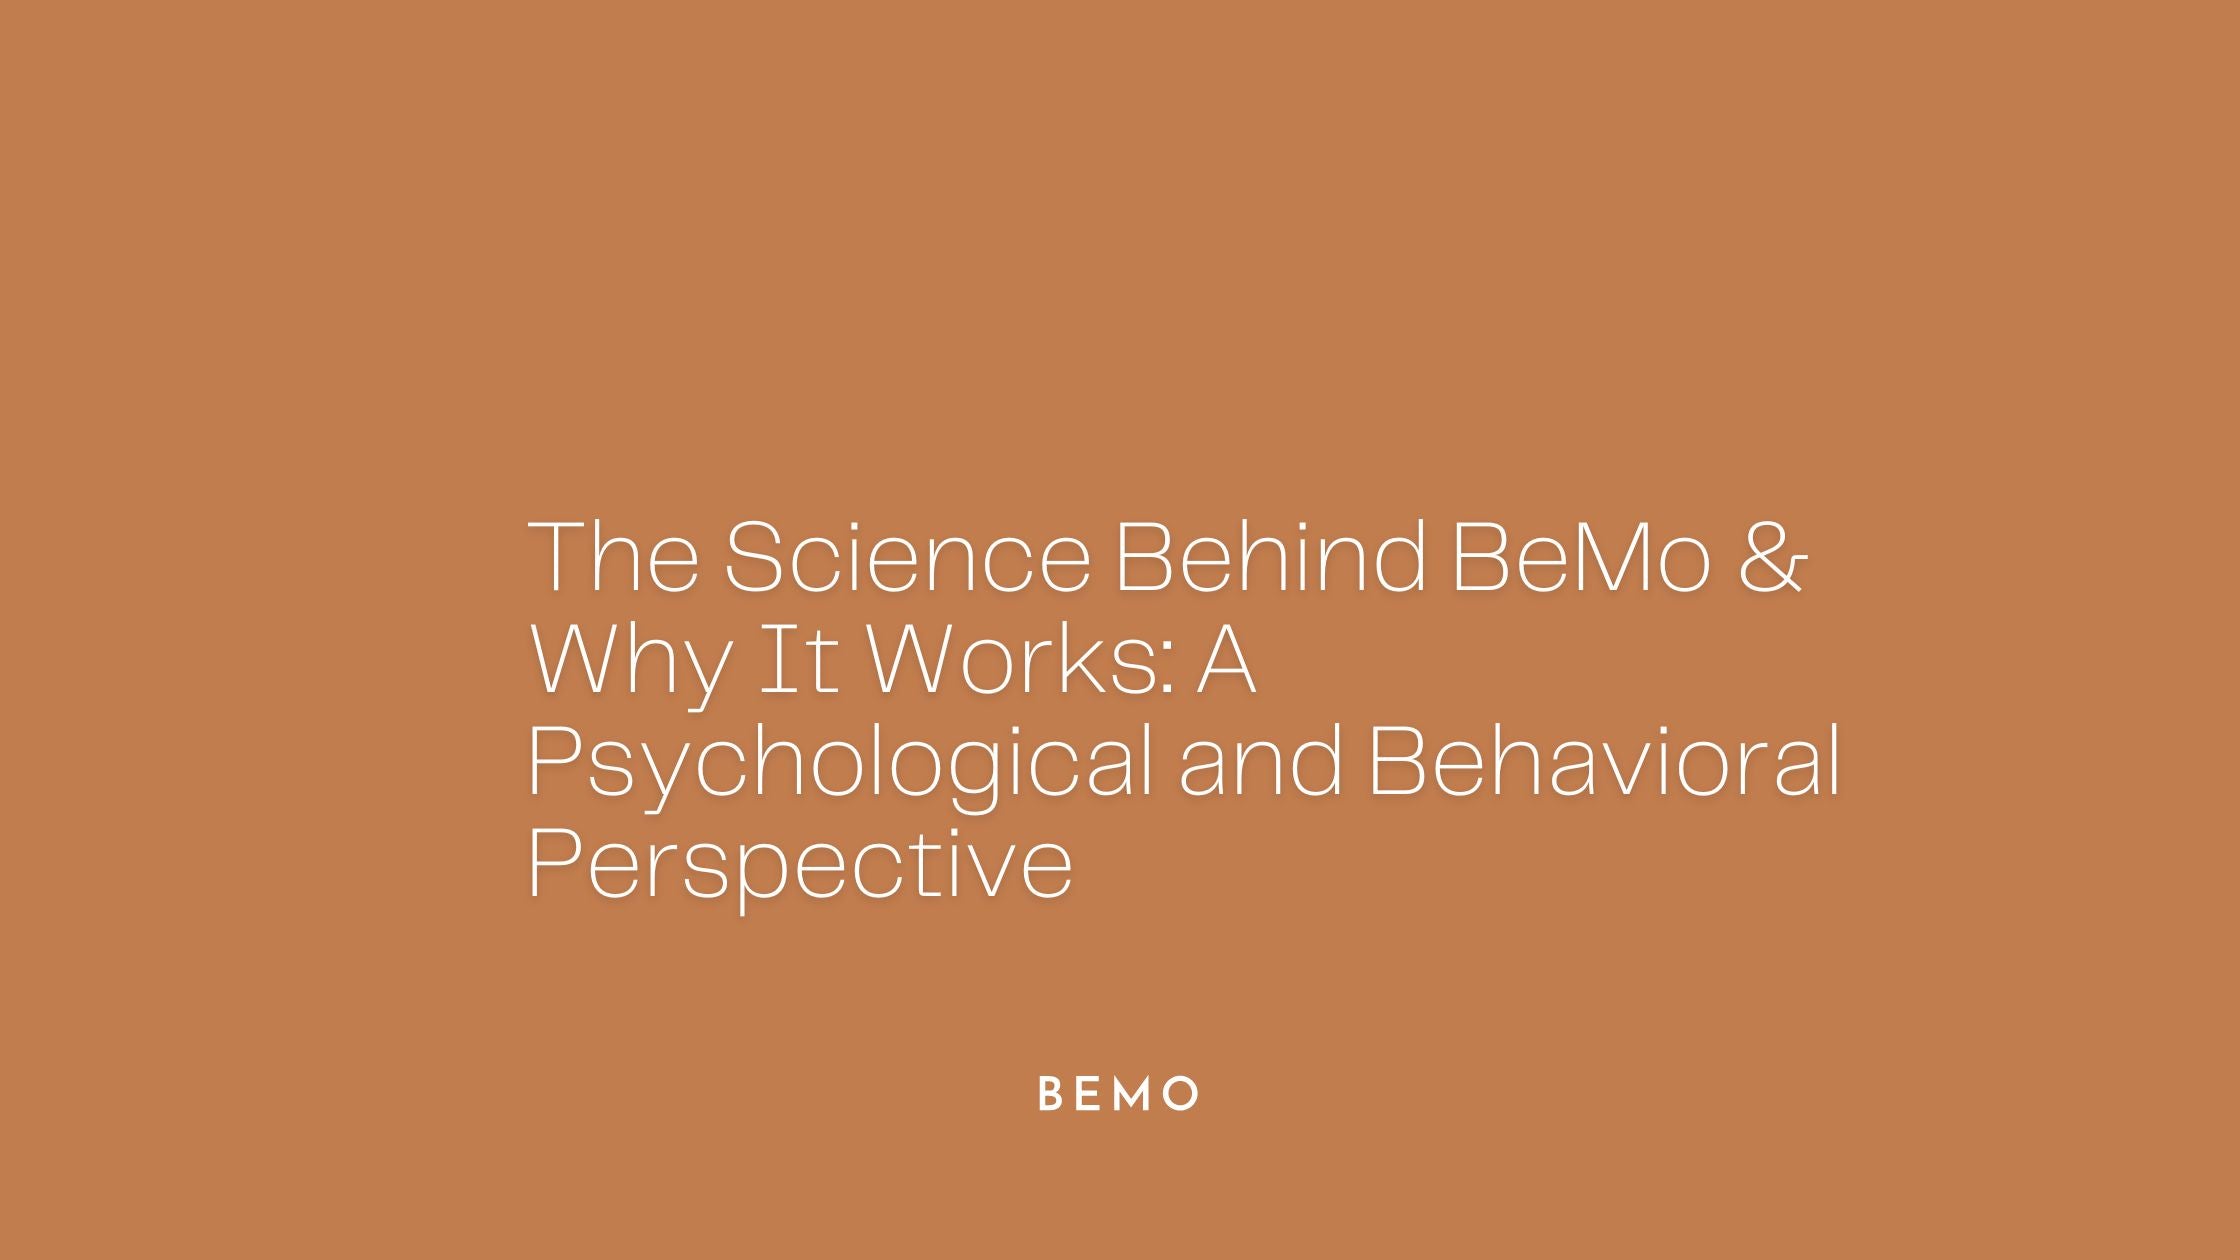 The Science Behind BeMo & Why It Works: A Psychological and Behavioral Perspective